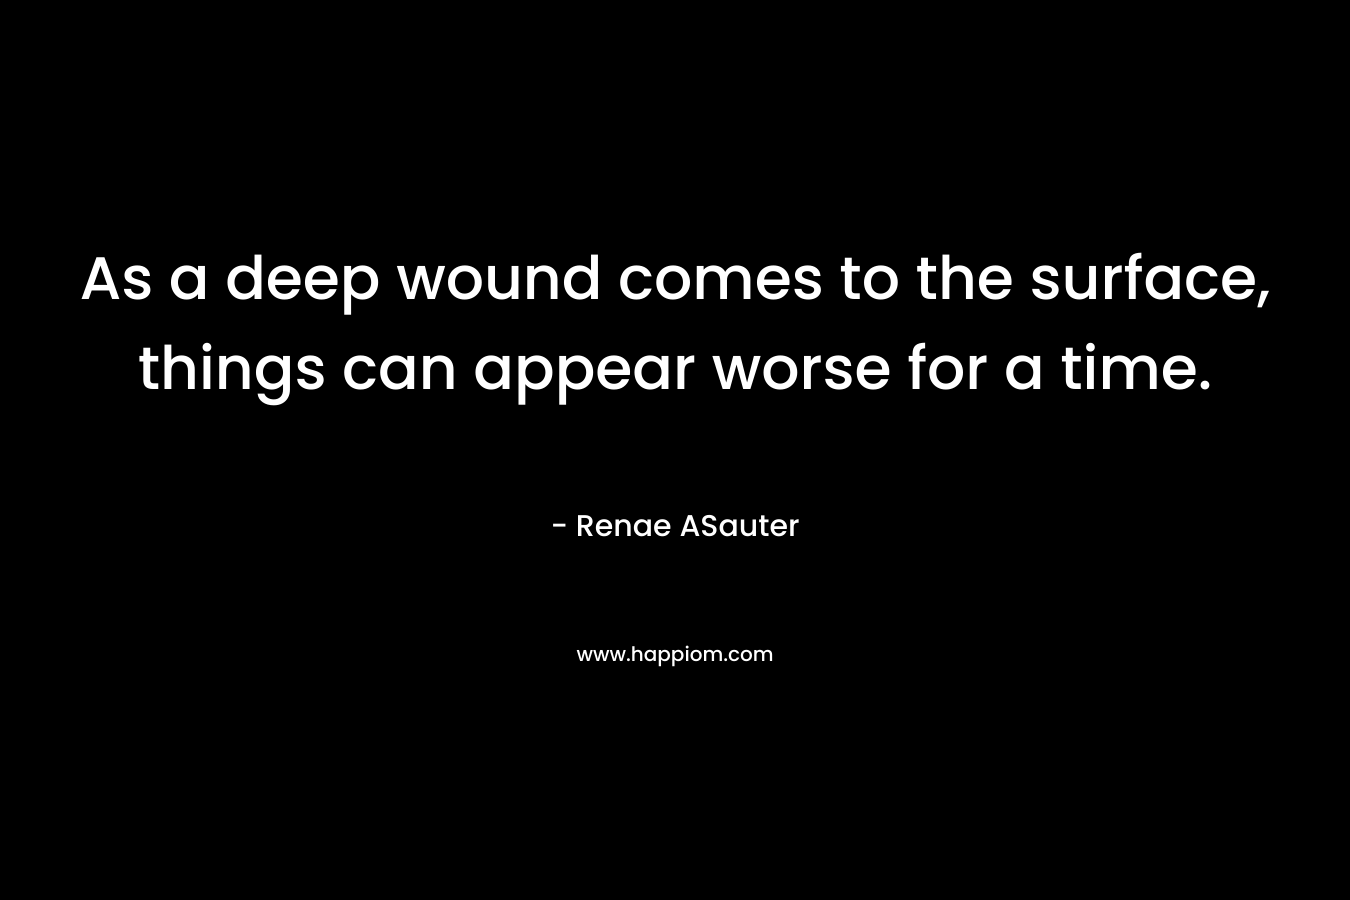 As a deep wound comes to the surface, things can appear worse for a time.